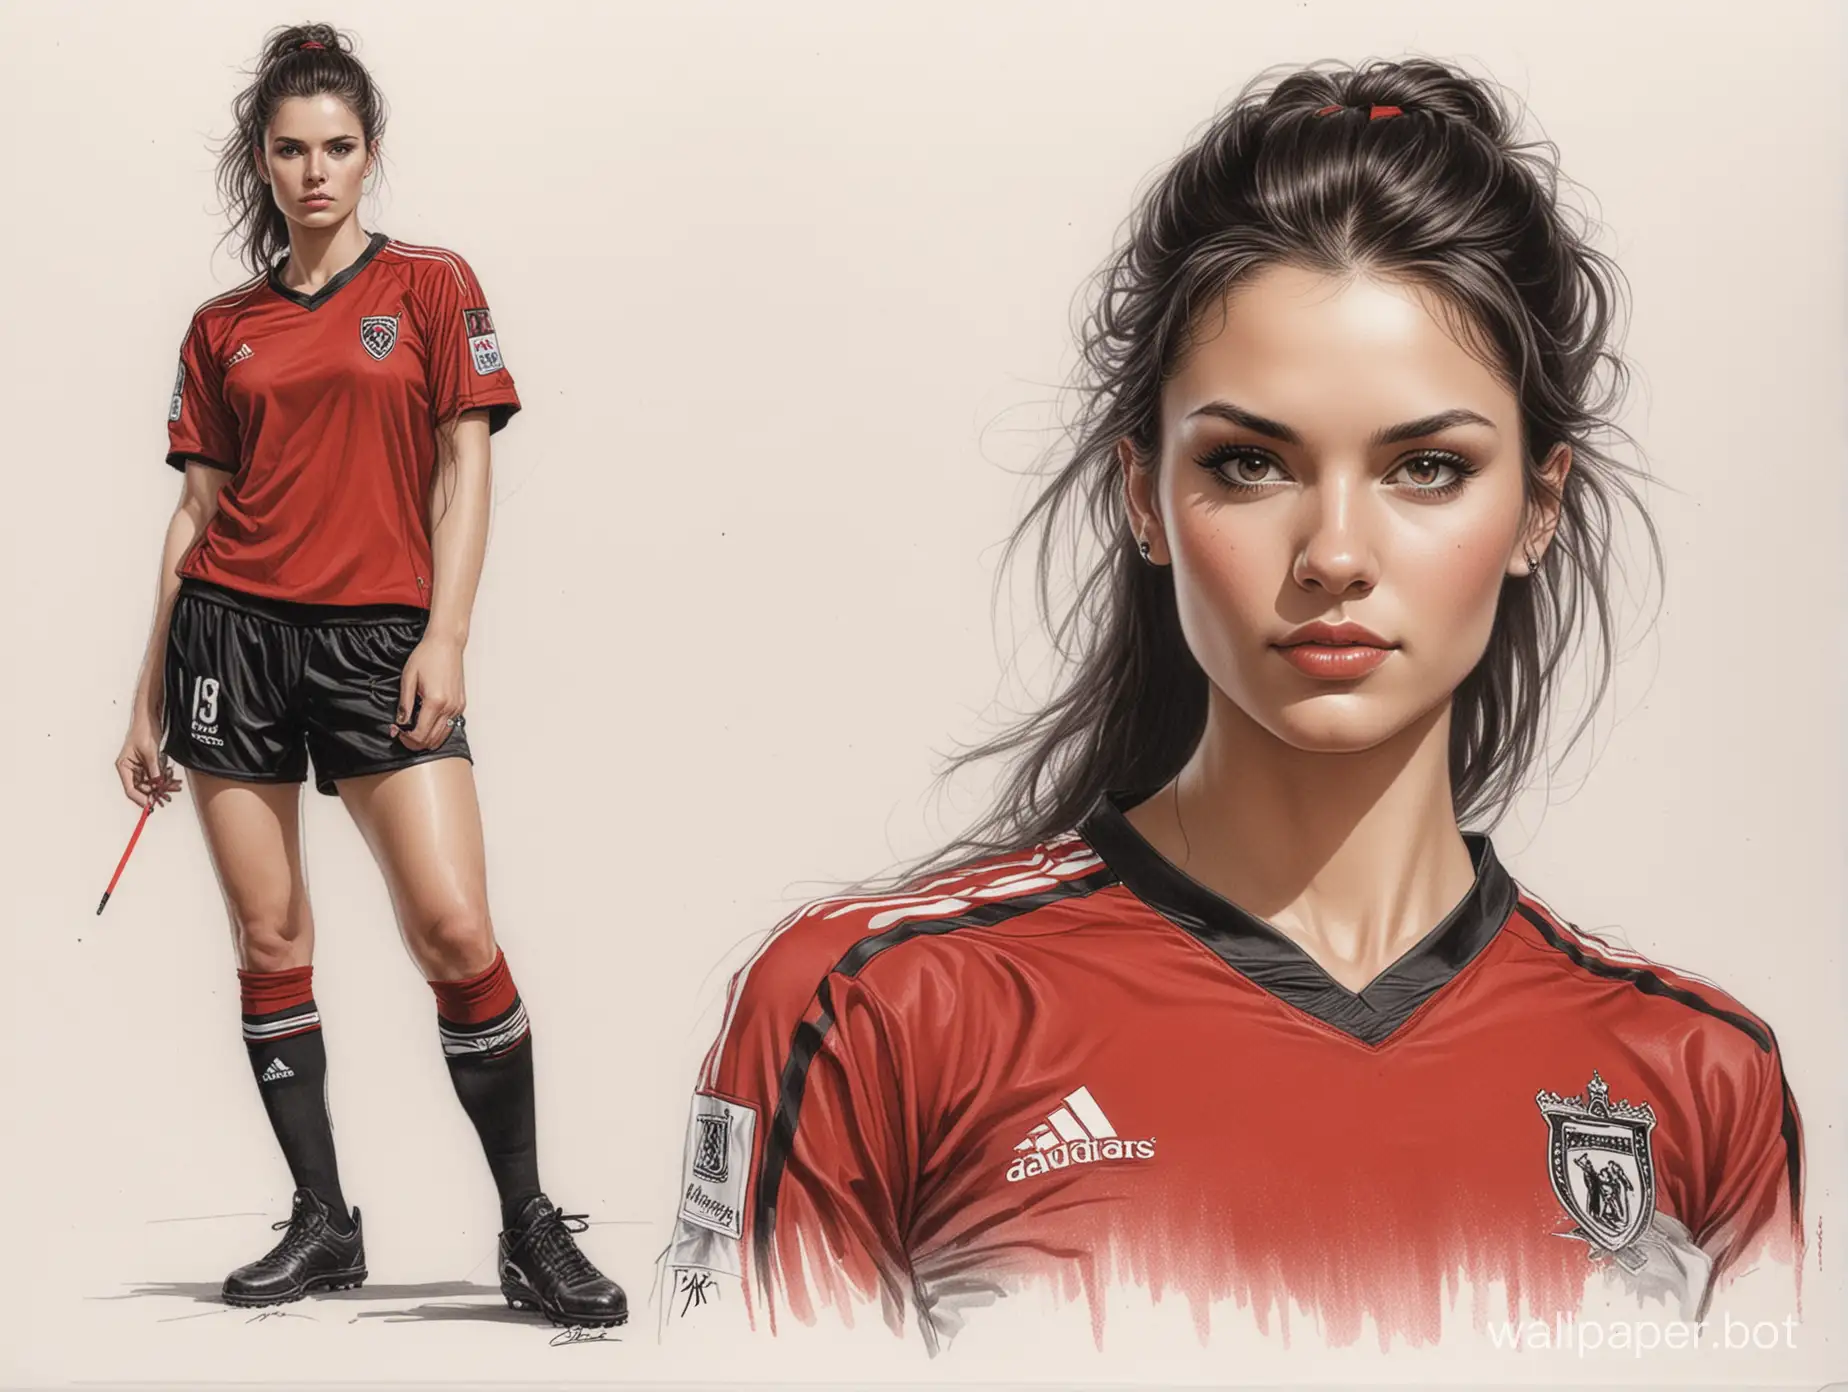 sketch of Julia Steingruber, 25 years old, dark hair styled, size 6 chest, narrow waist, in black and red soccer uniform, white background, sketch with marker, style of Luis Royo portrait